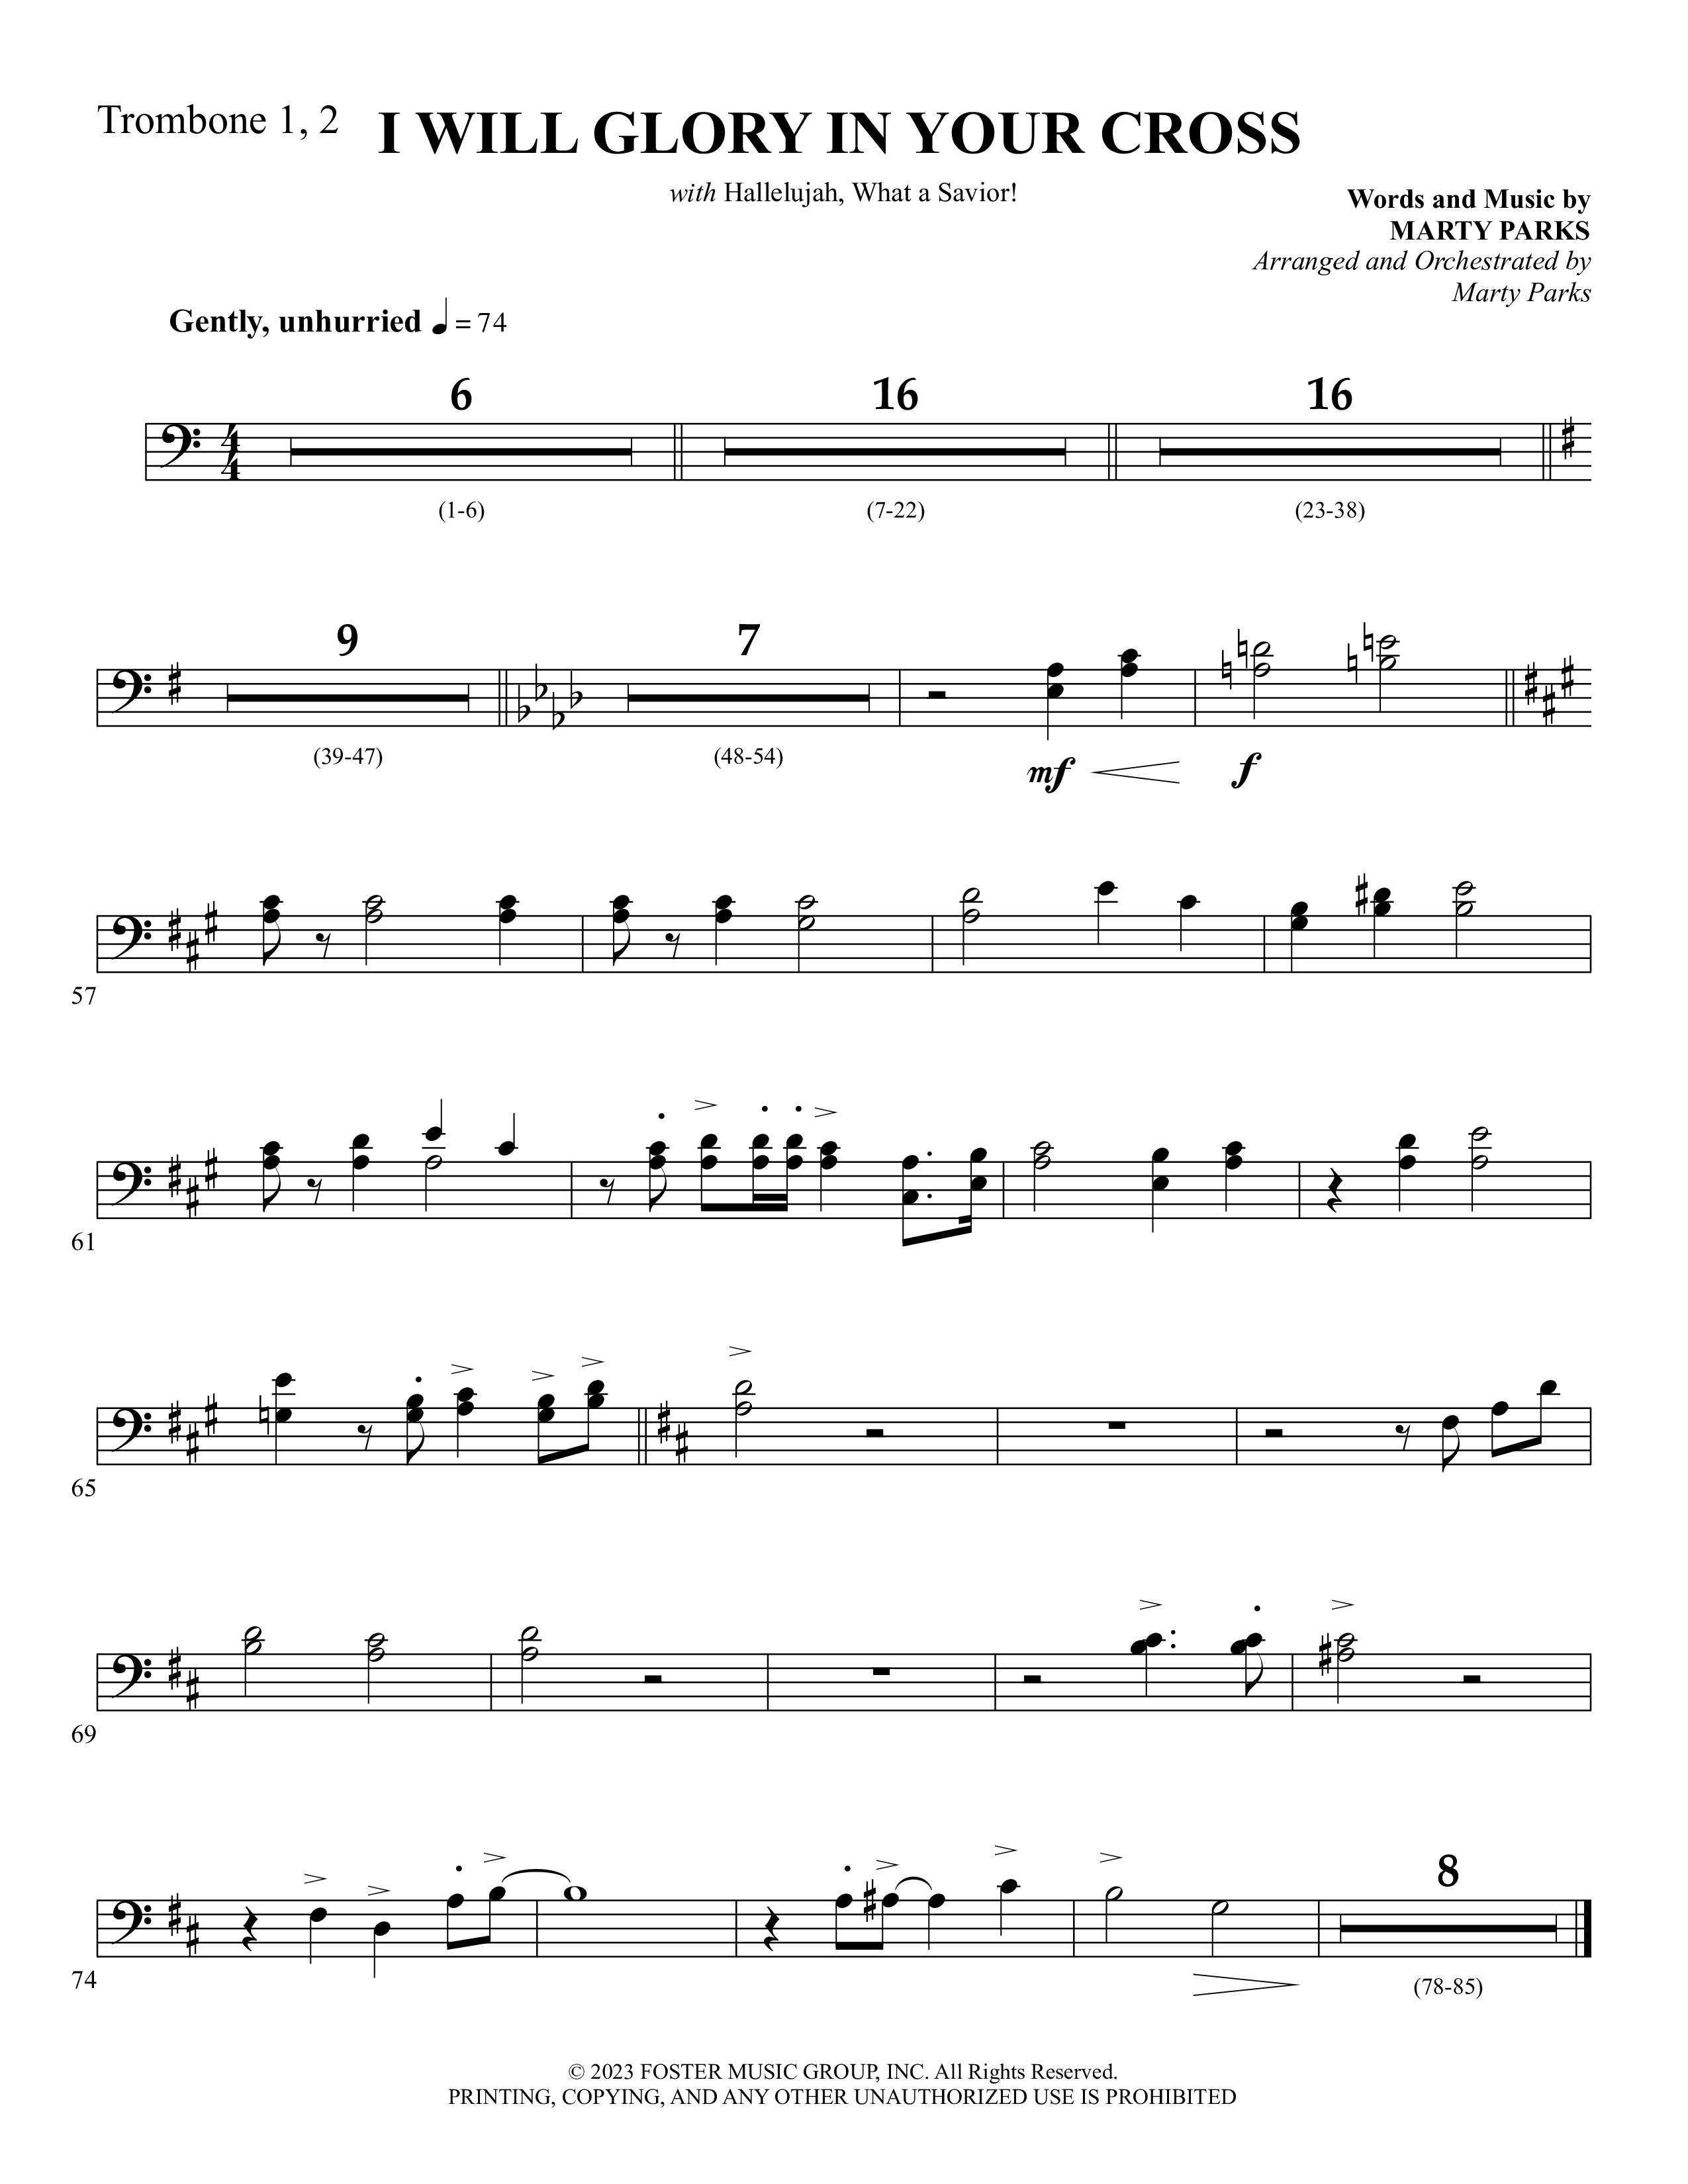 I Will Glory In Your Cross (with Hallelujah What A Savior) Trombone 1/2 (Foster Music Group / Arr. Marty Parks)